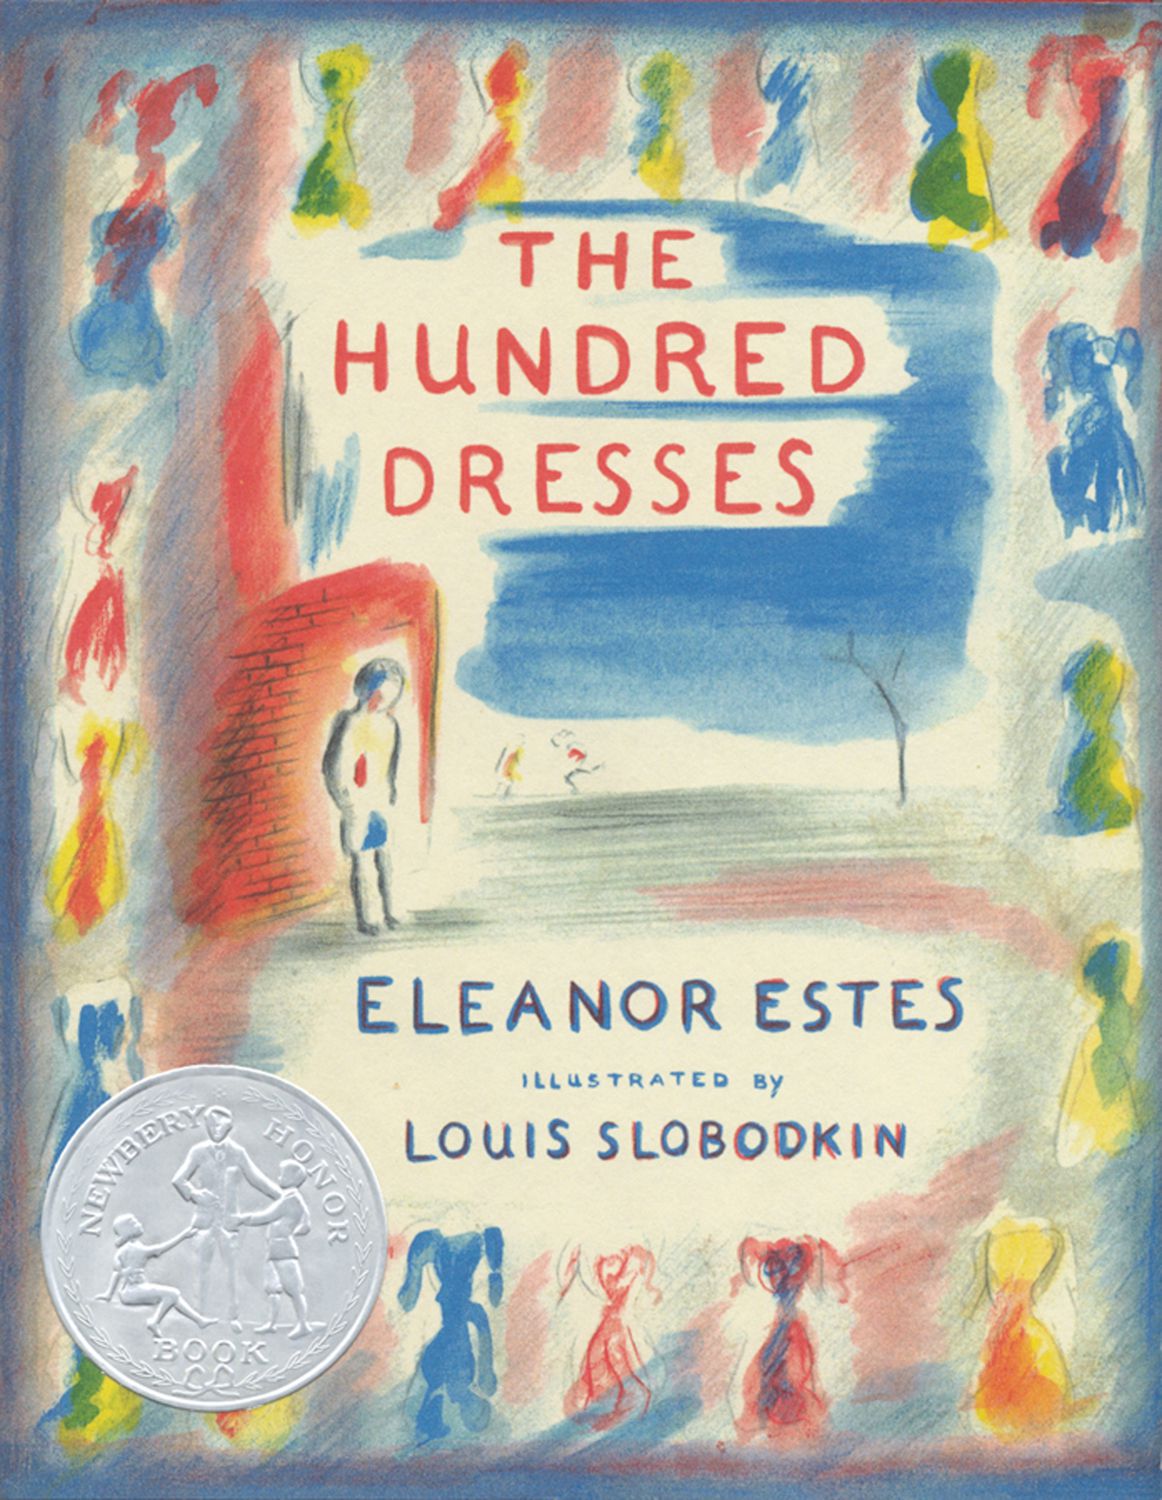 Book Review of The Hundred Dresses by Eleanor Estes